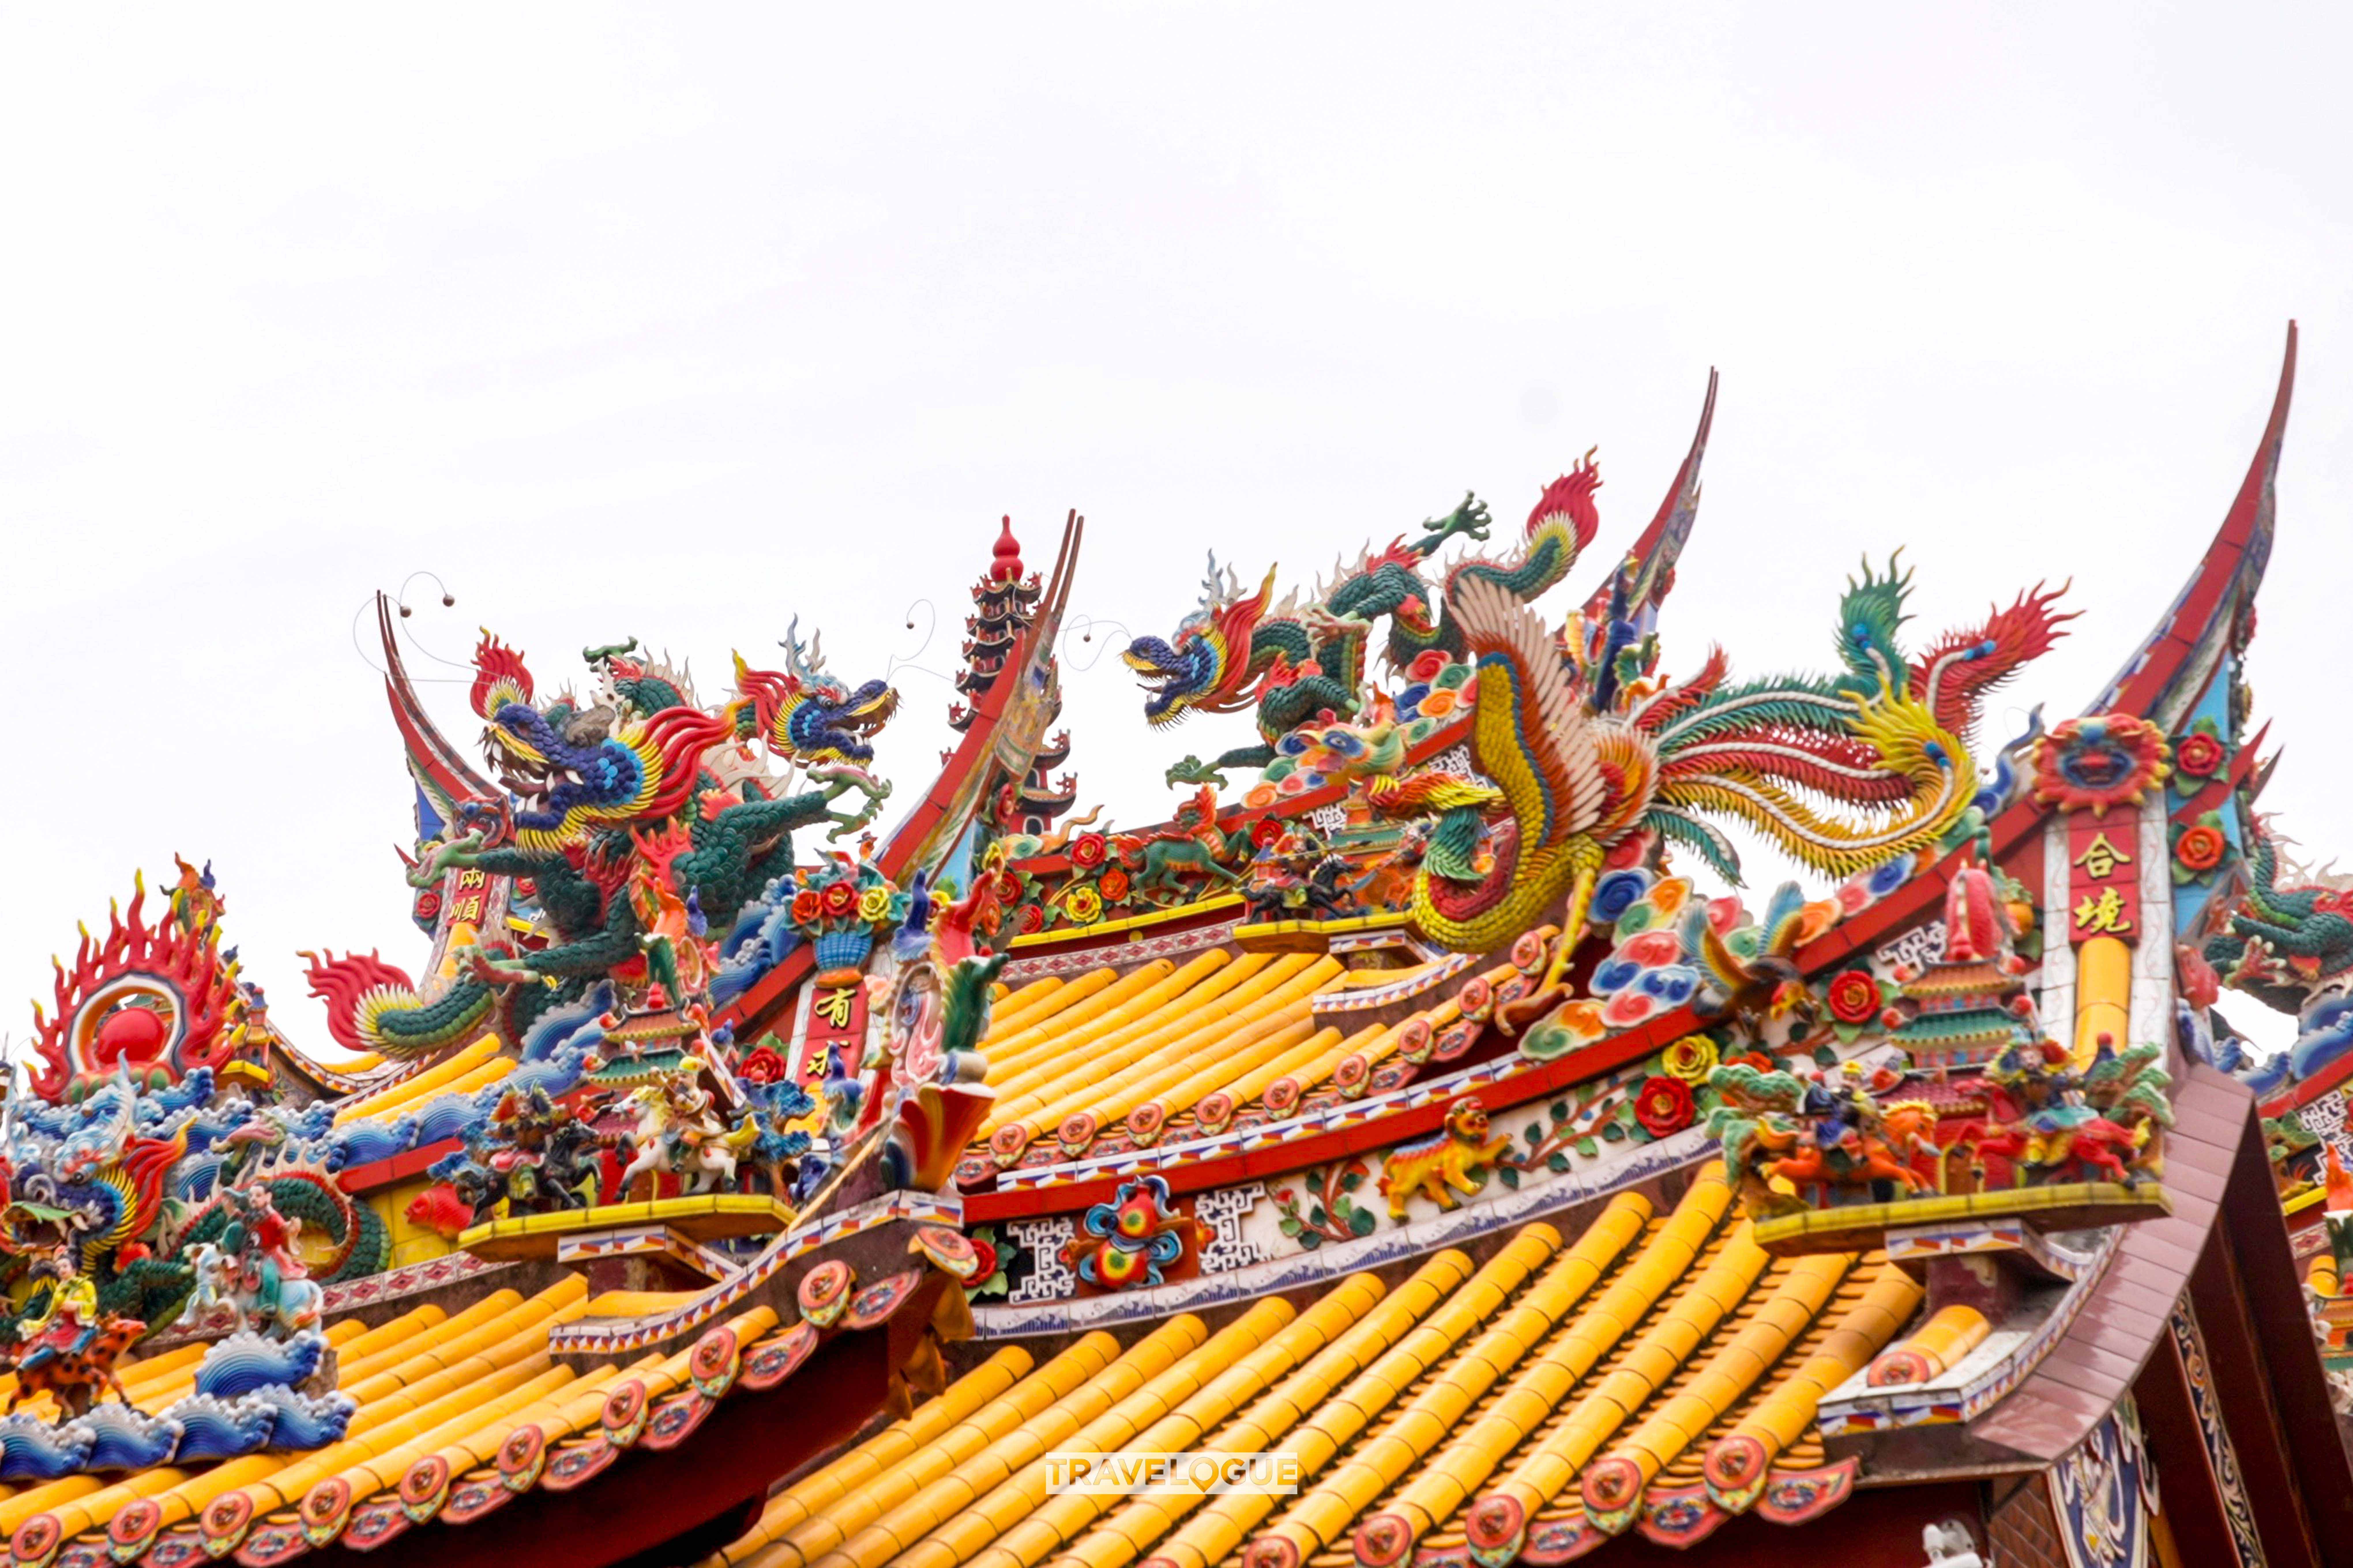 Inlaid porcelain dragons and deities adorn an ancestral temple in Xiamen, Fujian Province. /CGTN